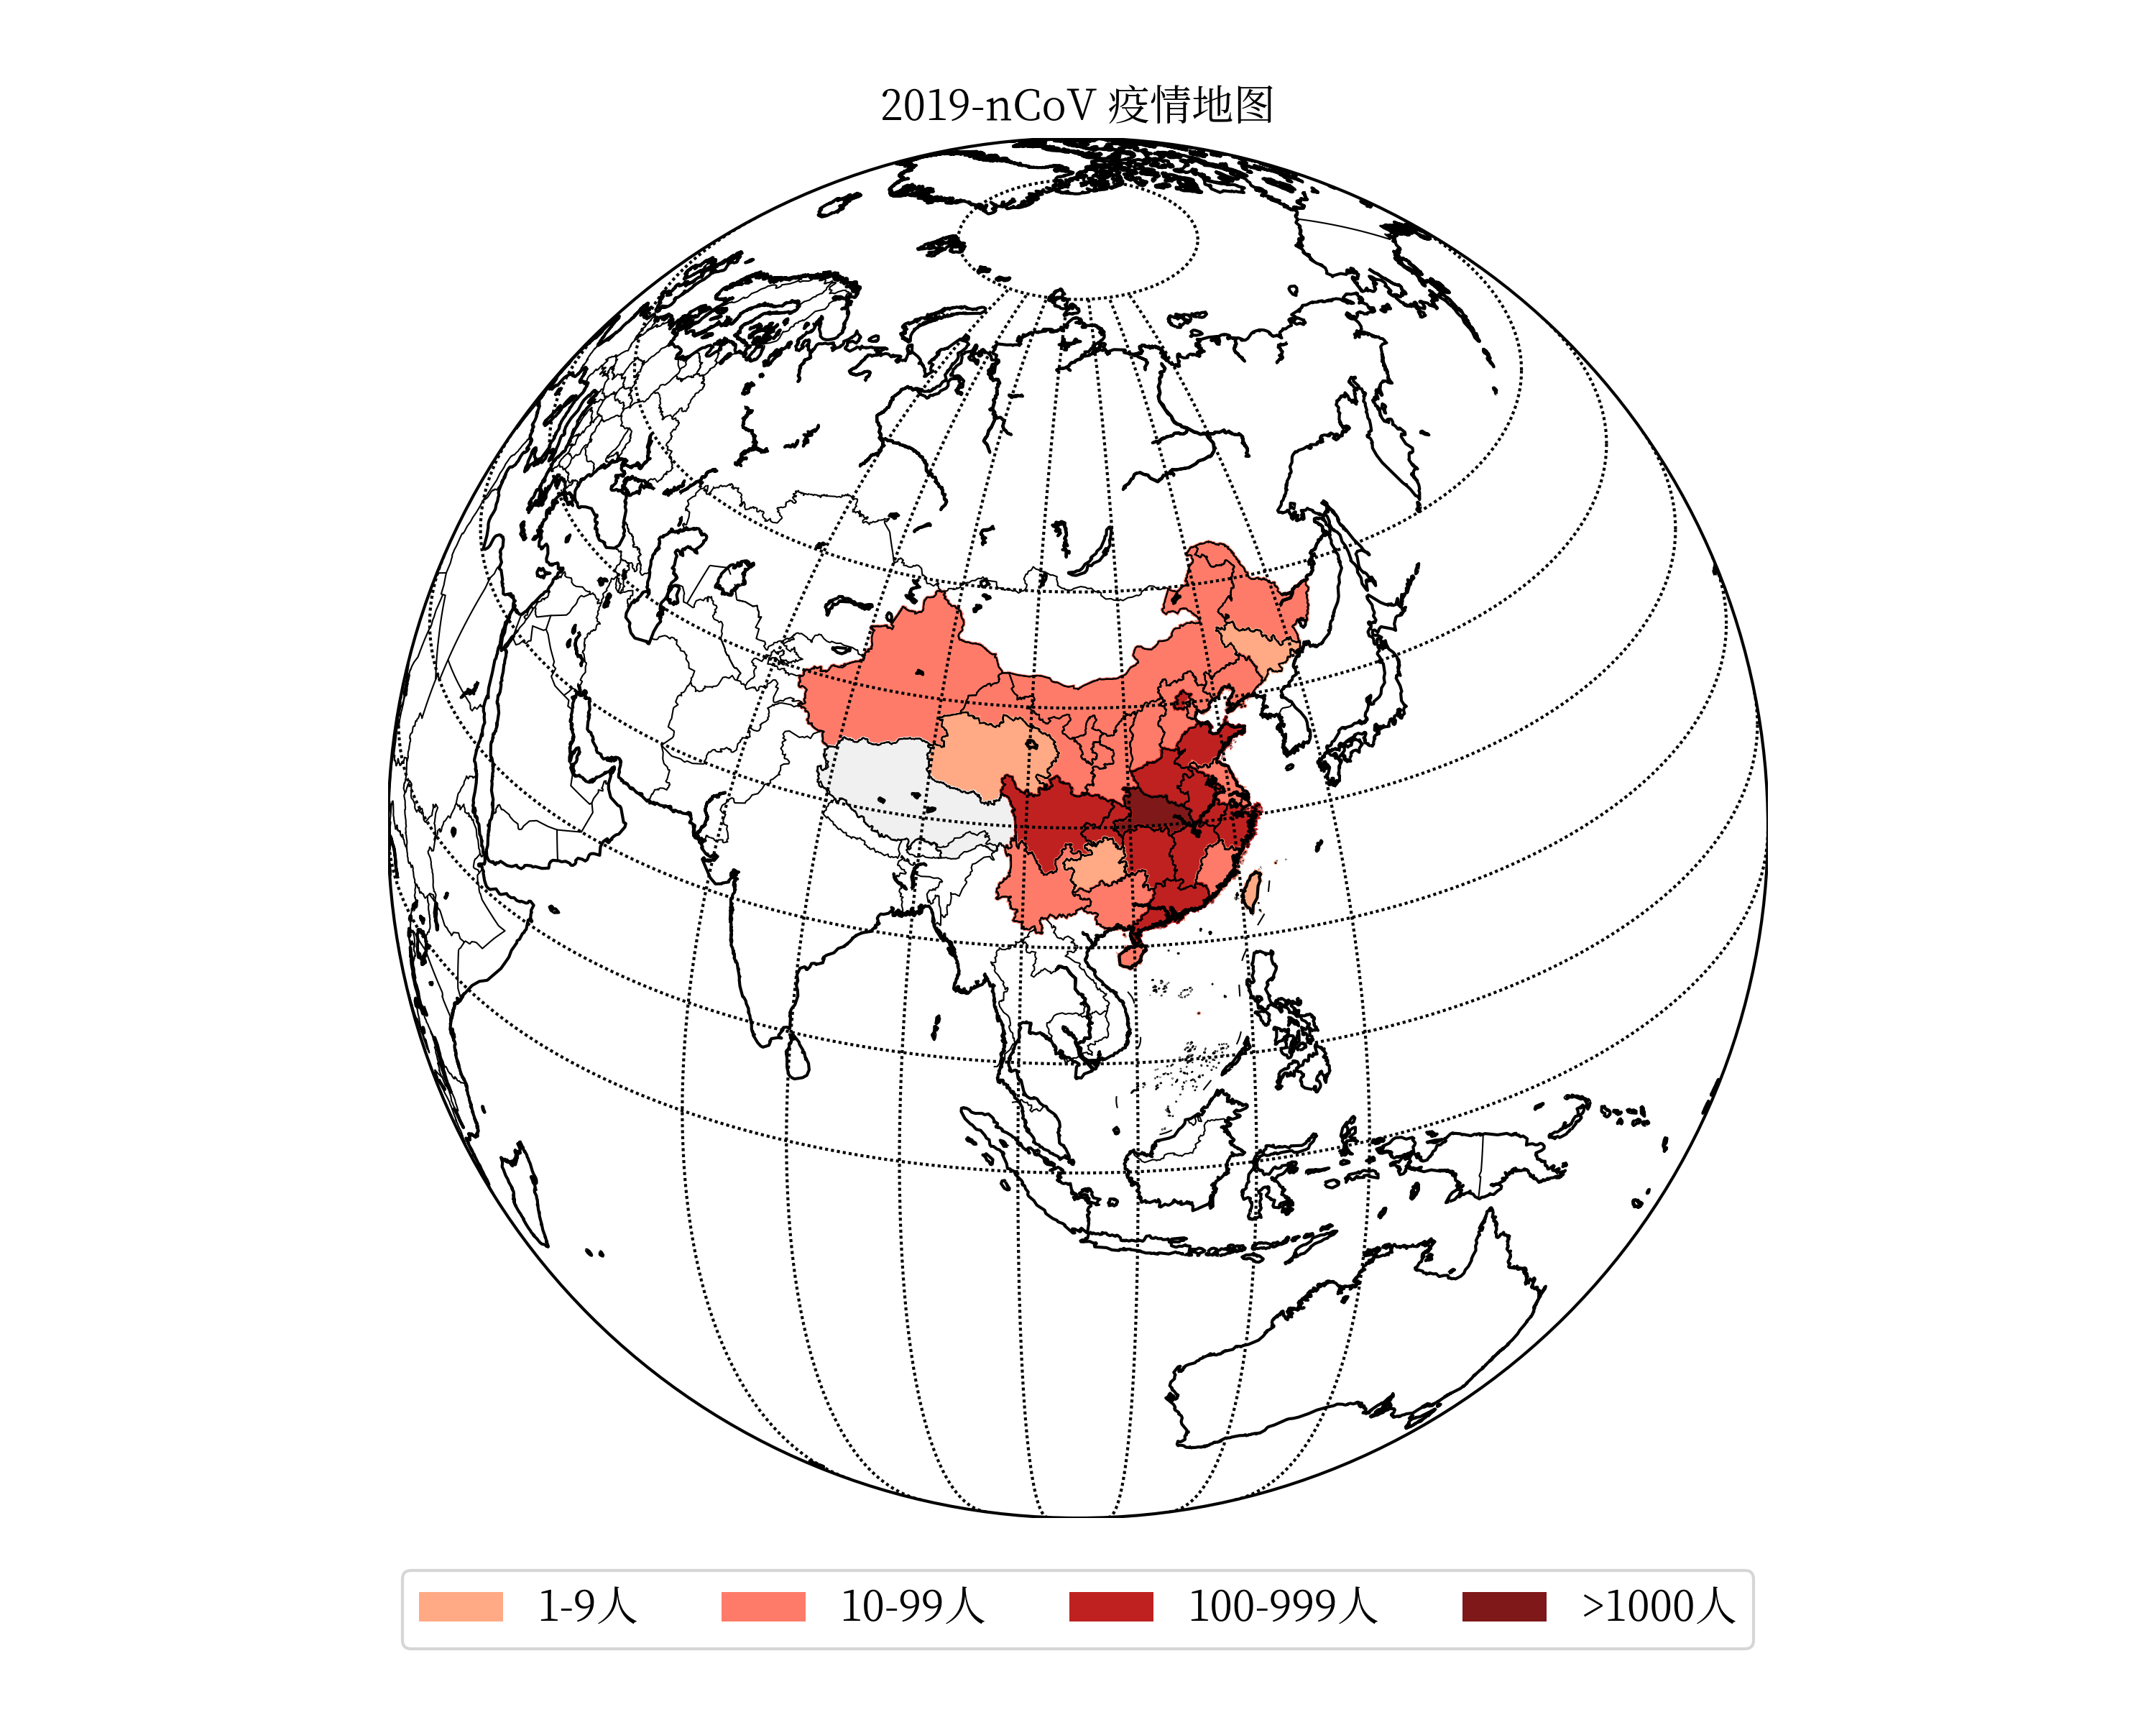 draw-the-map-of-2019-ncov-epidemic-distribution-4.png